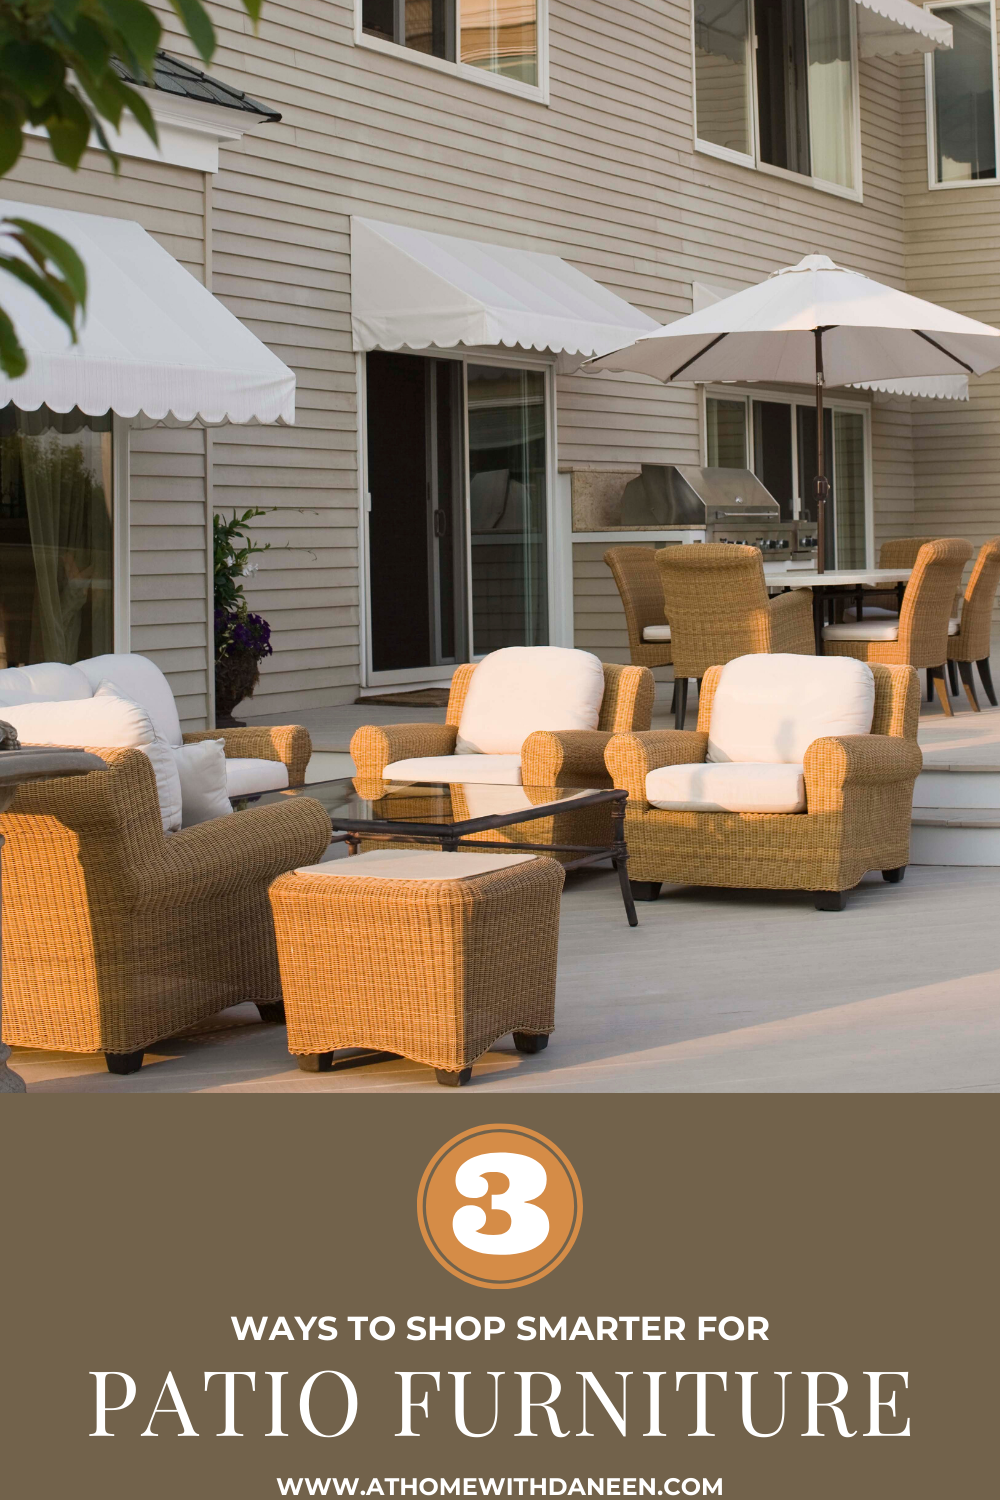 Three Ways To Shop Smarter For Patio Furniture in 2020 ...